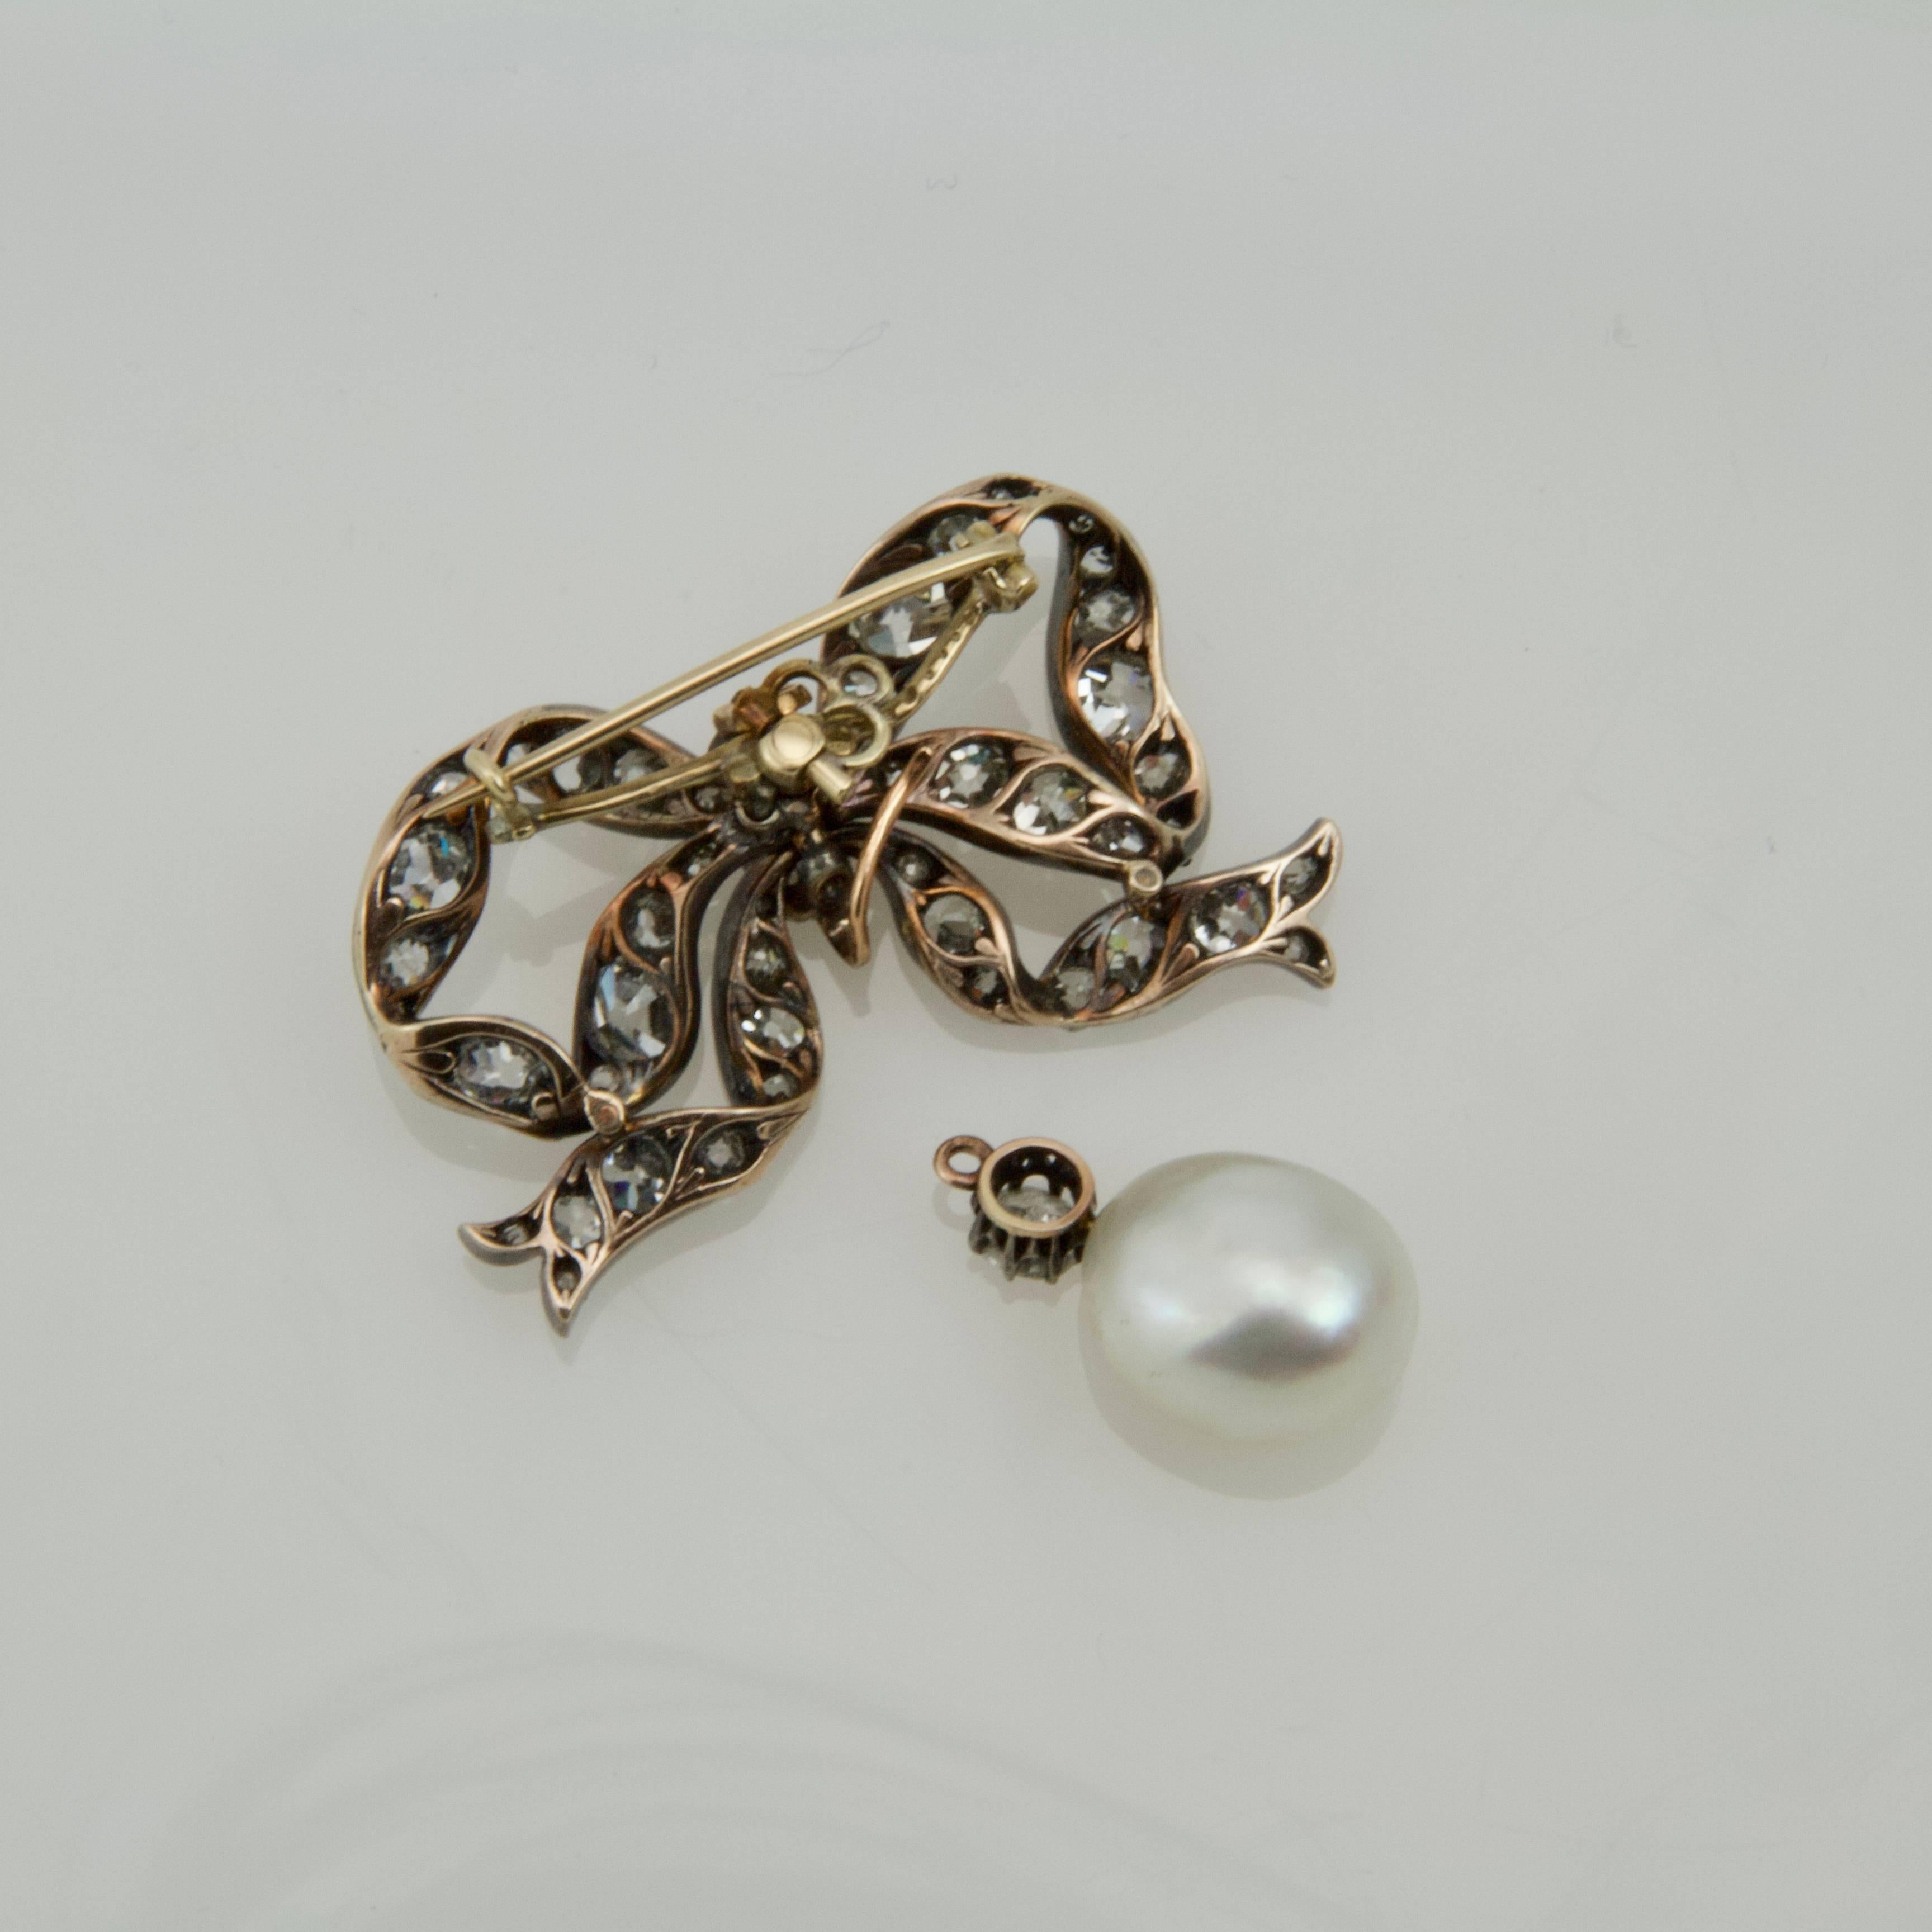 European 19th Century Cultured Pearl and Diamond Bow-Brooch